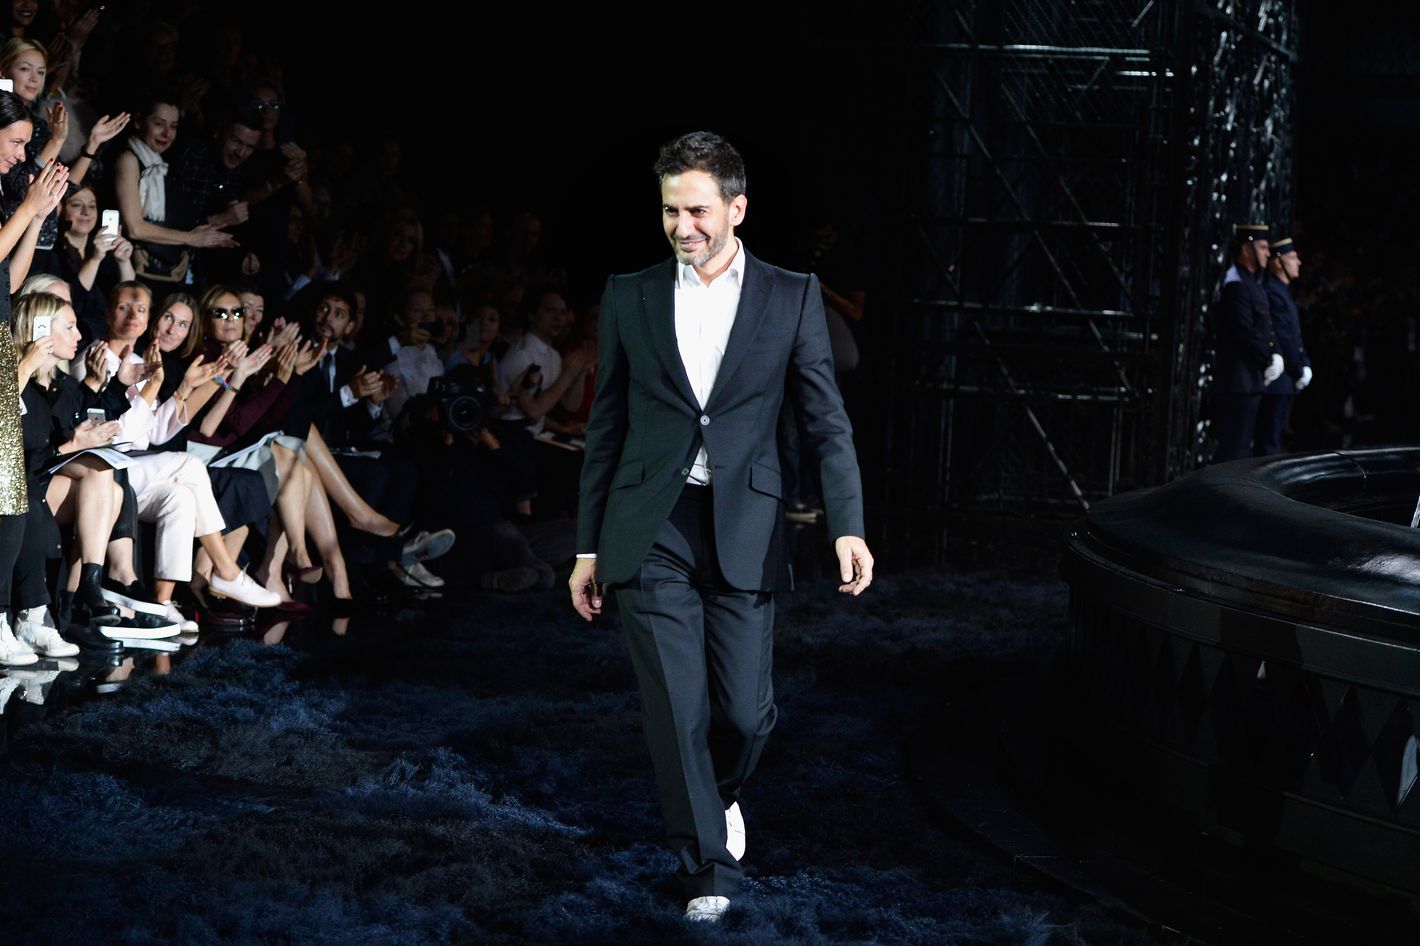 Marc Jacobs talks about his exit from Louis Vuitton and his future